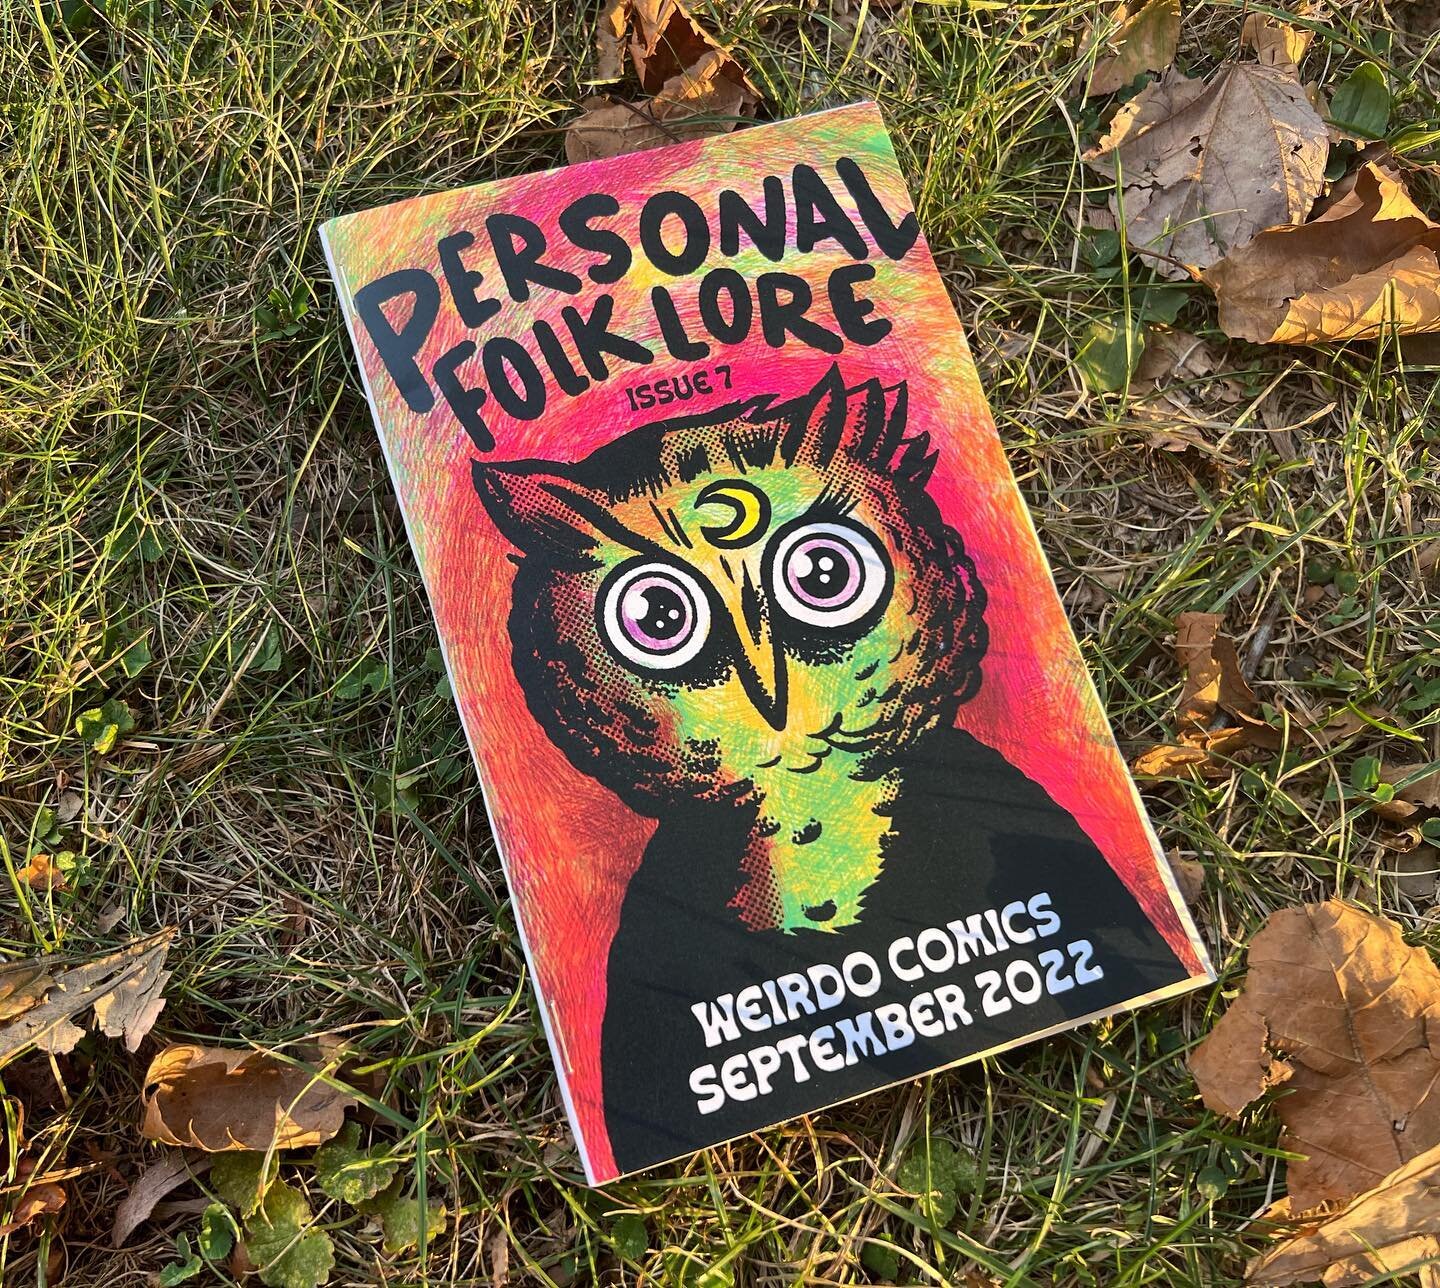 Owls are weird. 🦉 

Personal Folklore 7 ships to subscribers first thing next week and drops in the shop 9/14. I&rsquo;m also gonna have copies at the @spxcomics in a few weeks! I&rsquo;m so stoked to be sharing a table with @weirdoverse, couldn&rsq